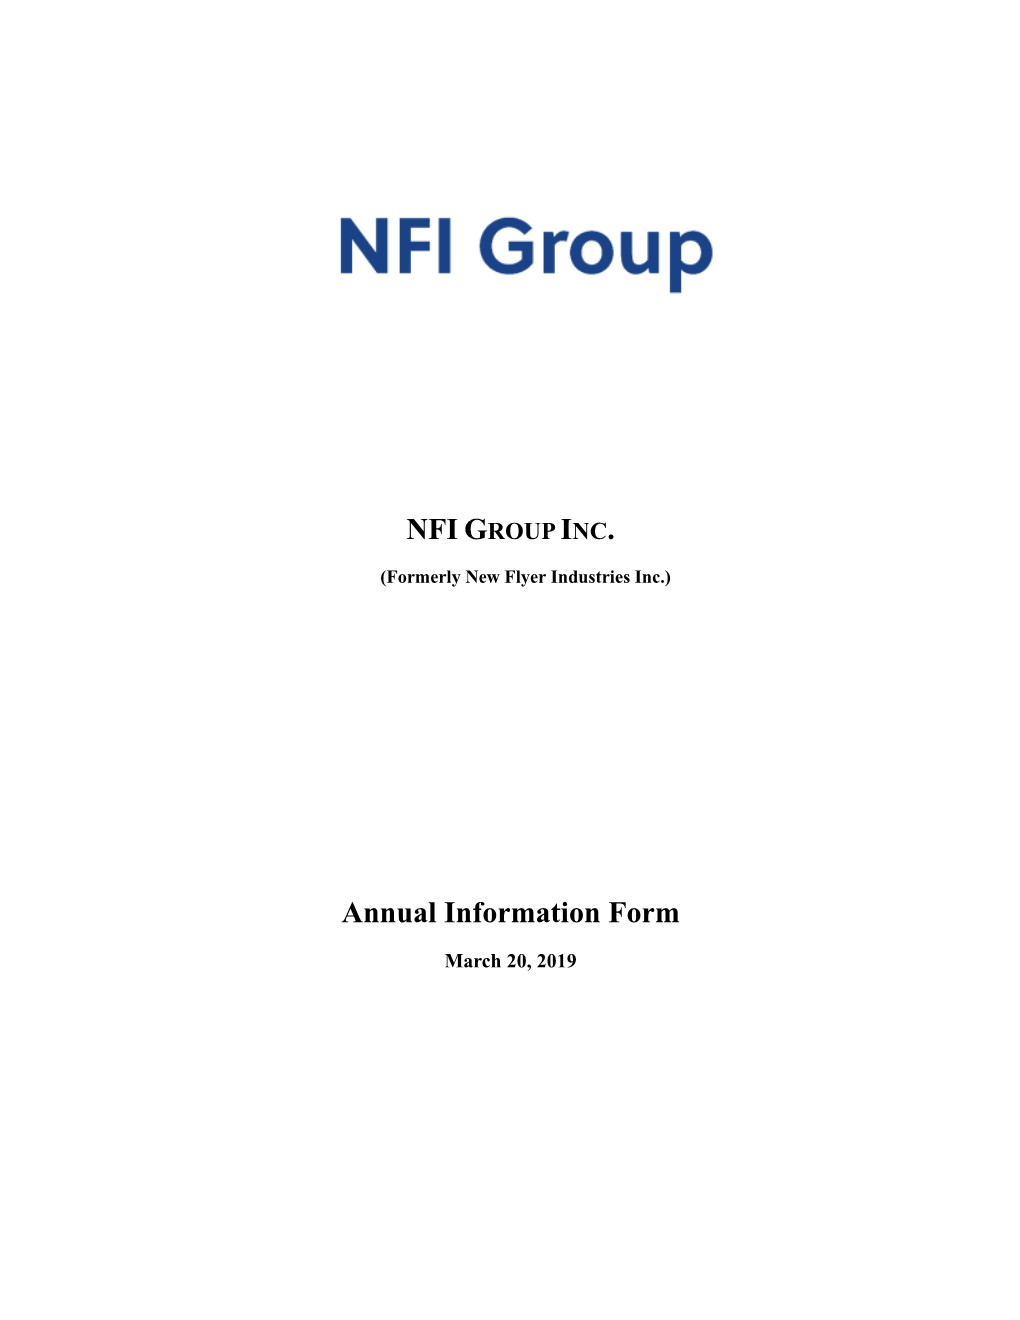 NFI GROUP INC. Annual Information Form